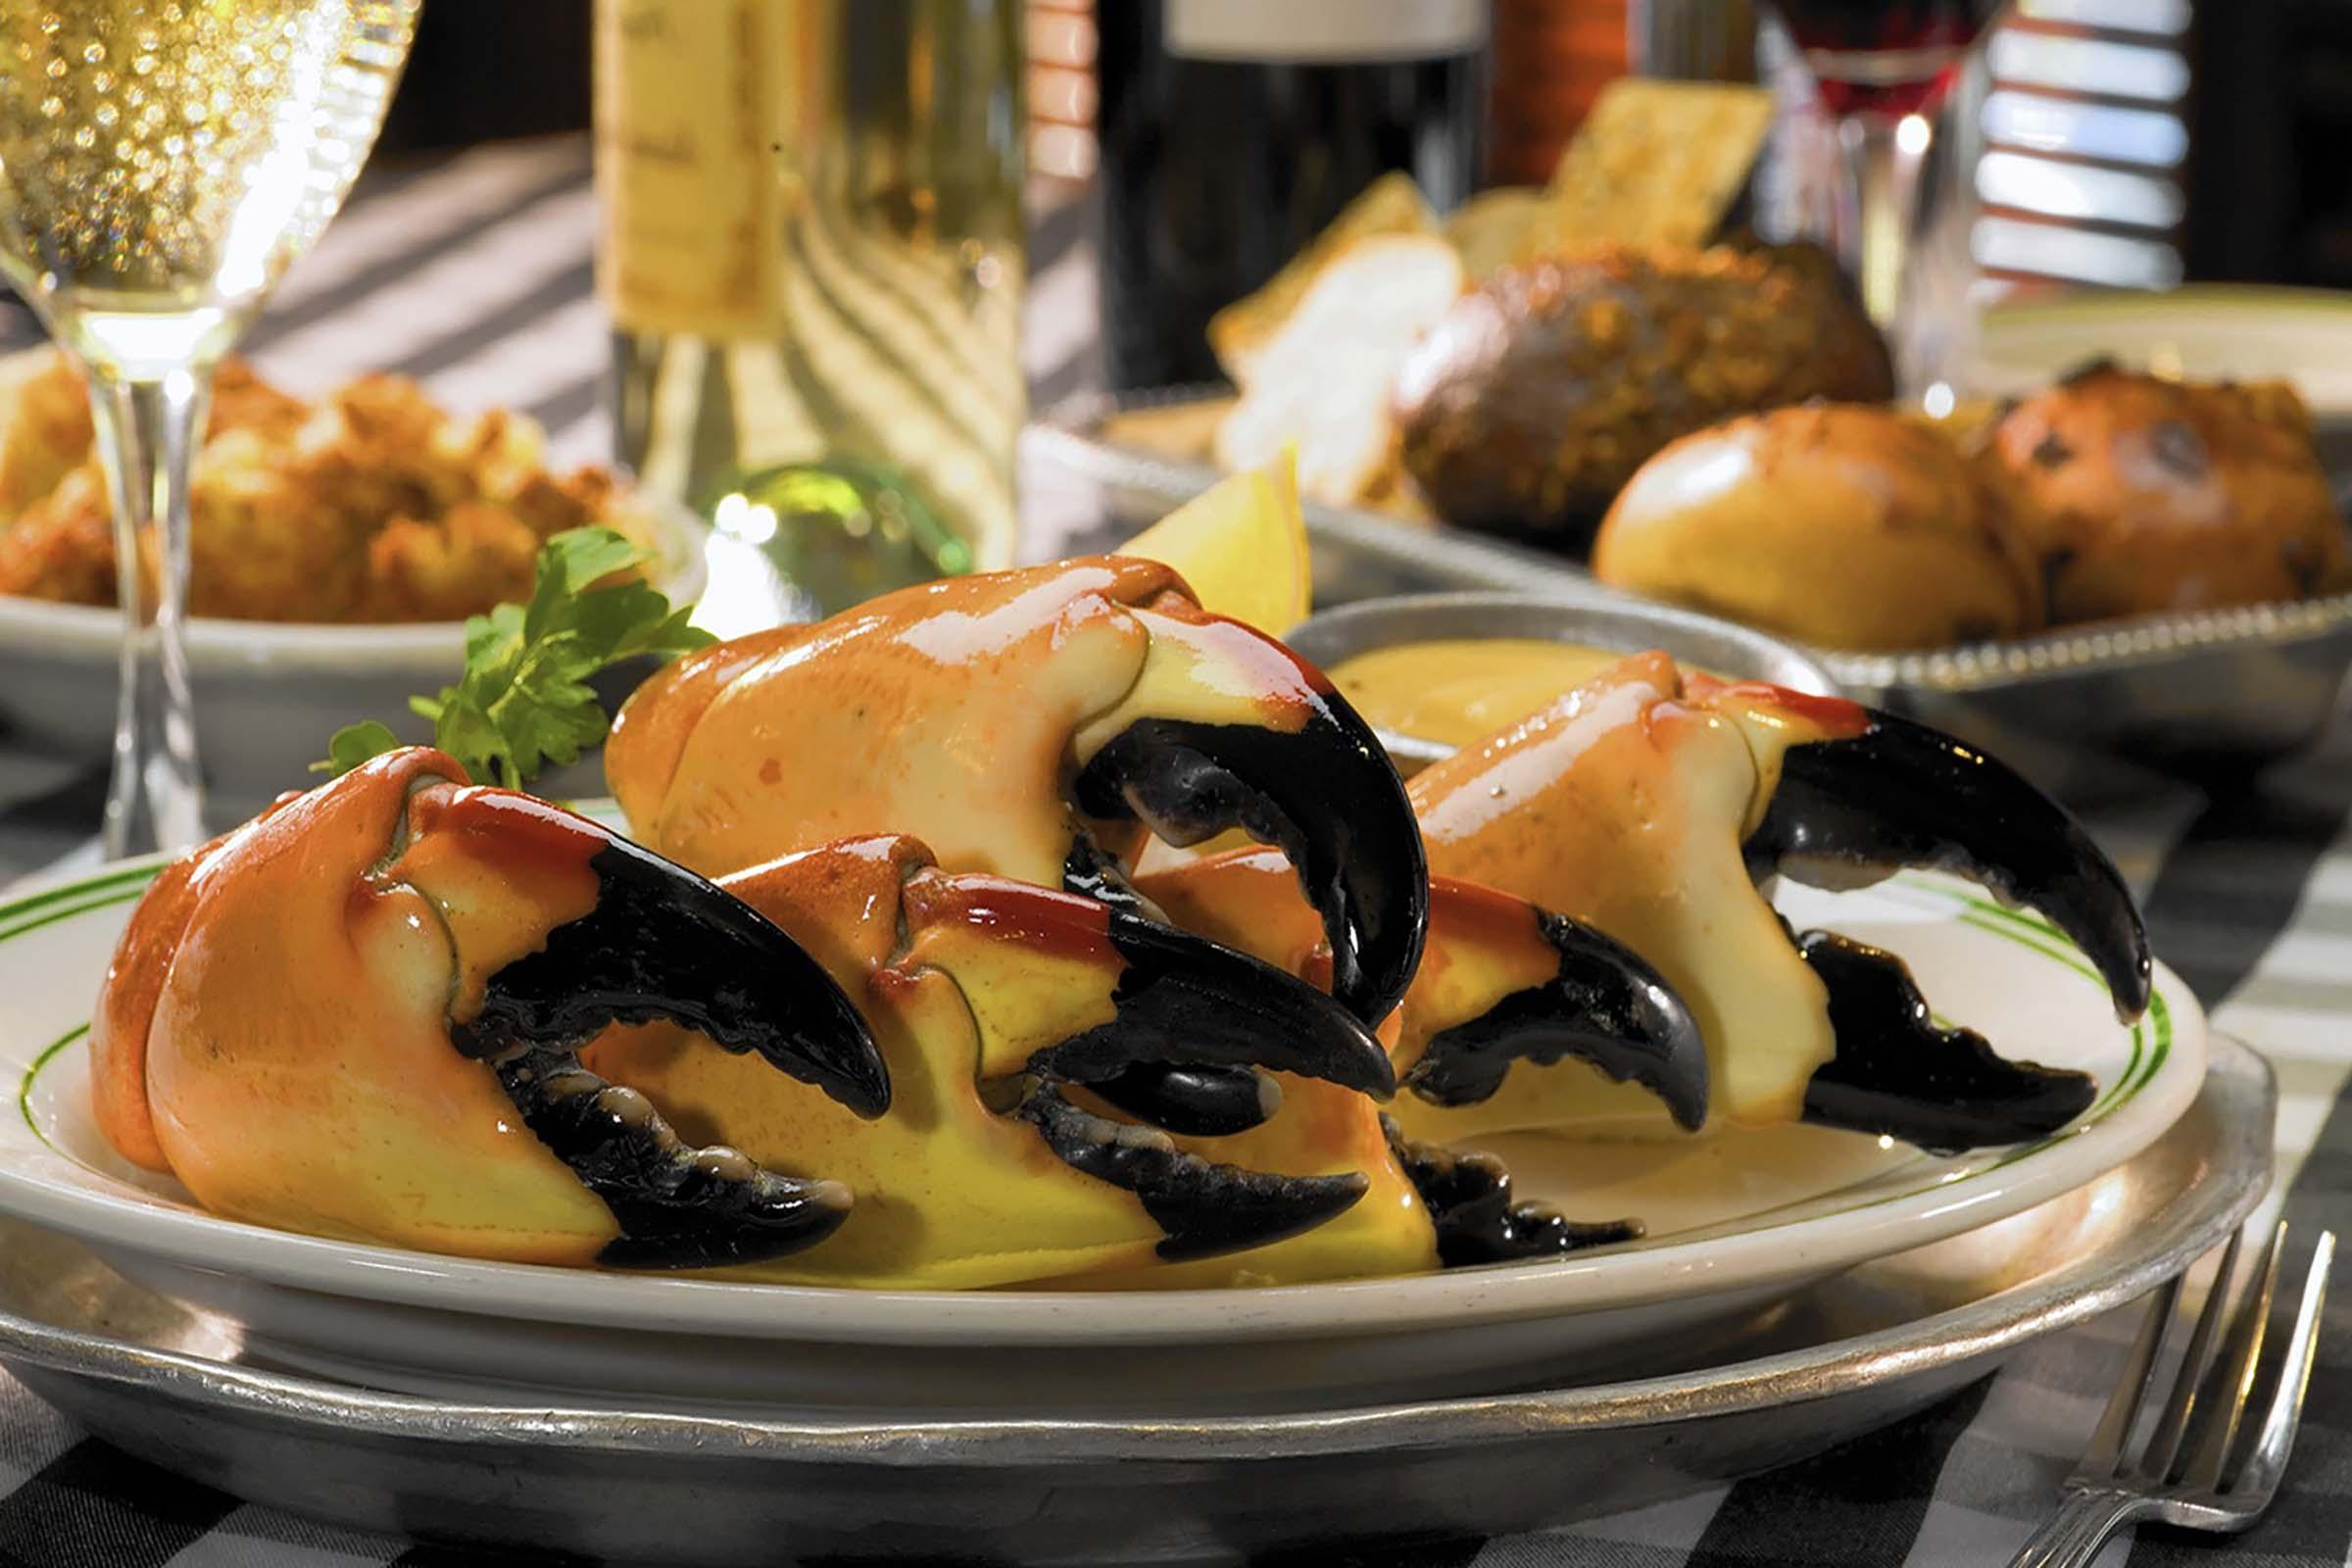 Stone Crab Season 2023 Begins Today – All You Need To Know